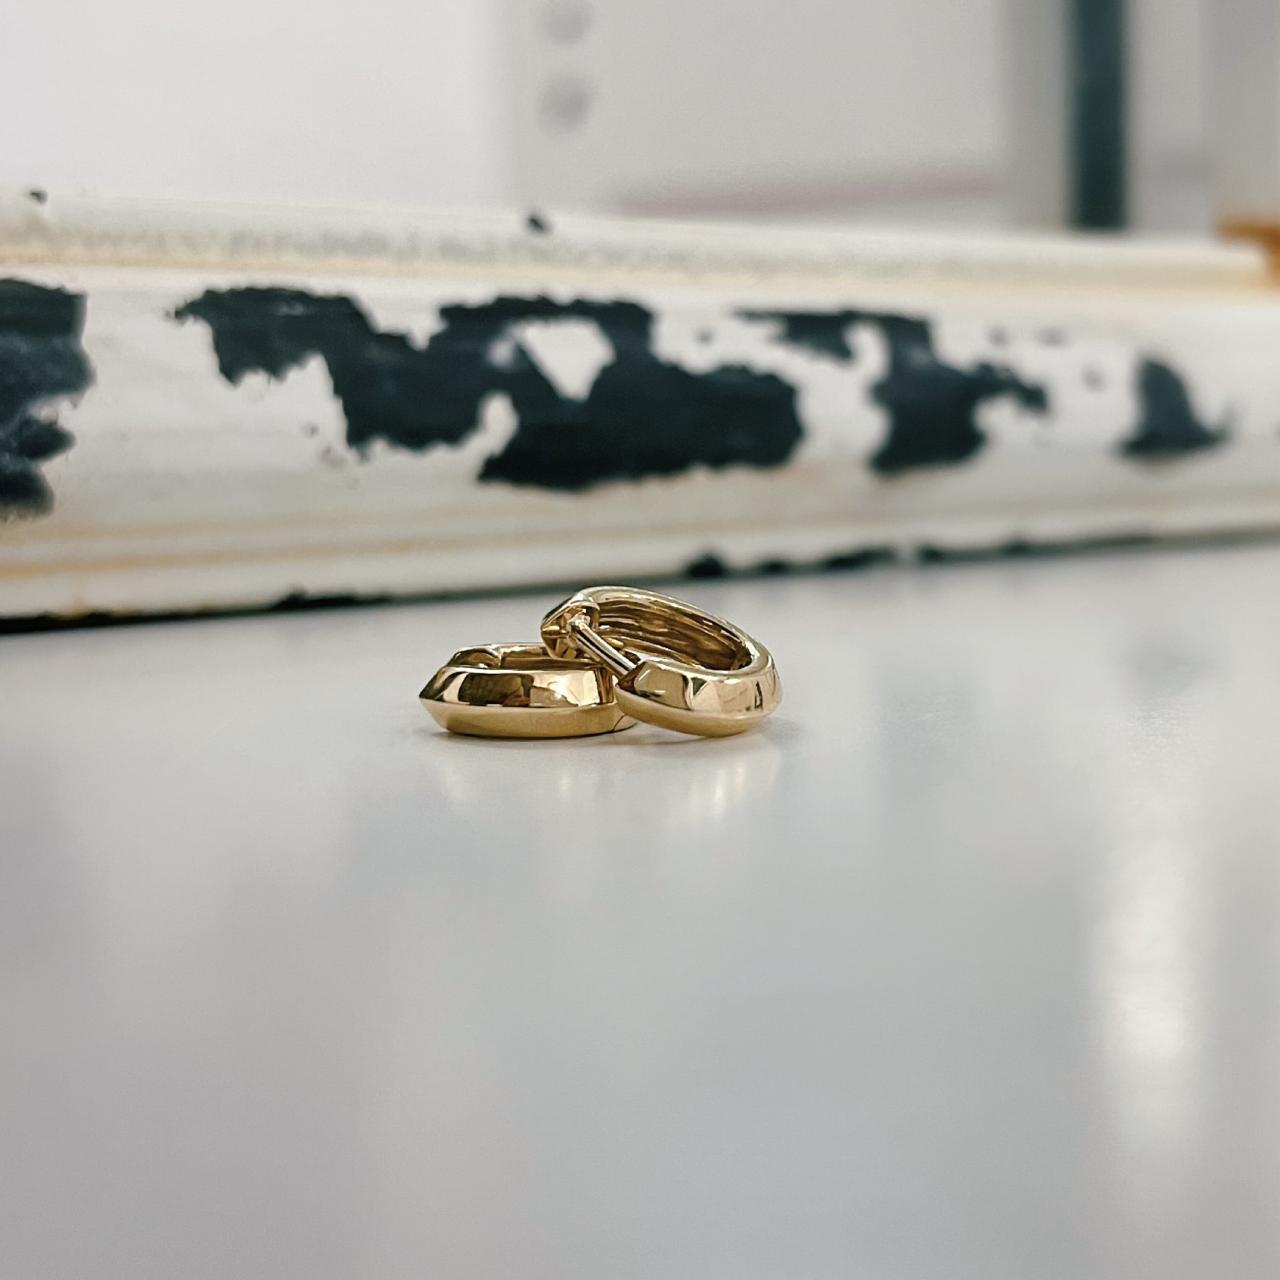 Lovely 18ct gold huggies